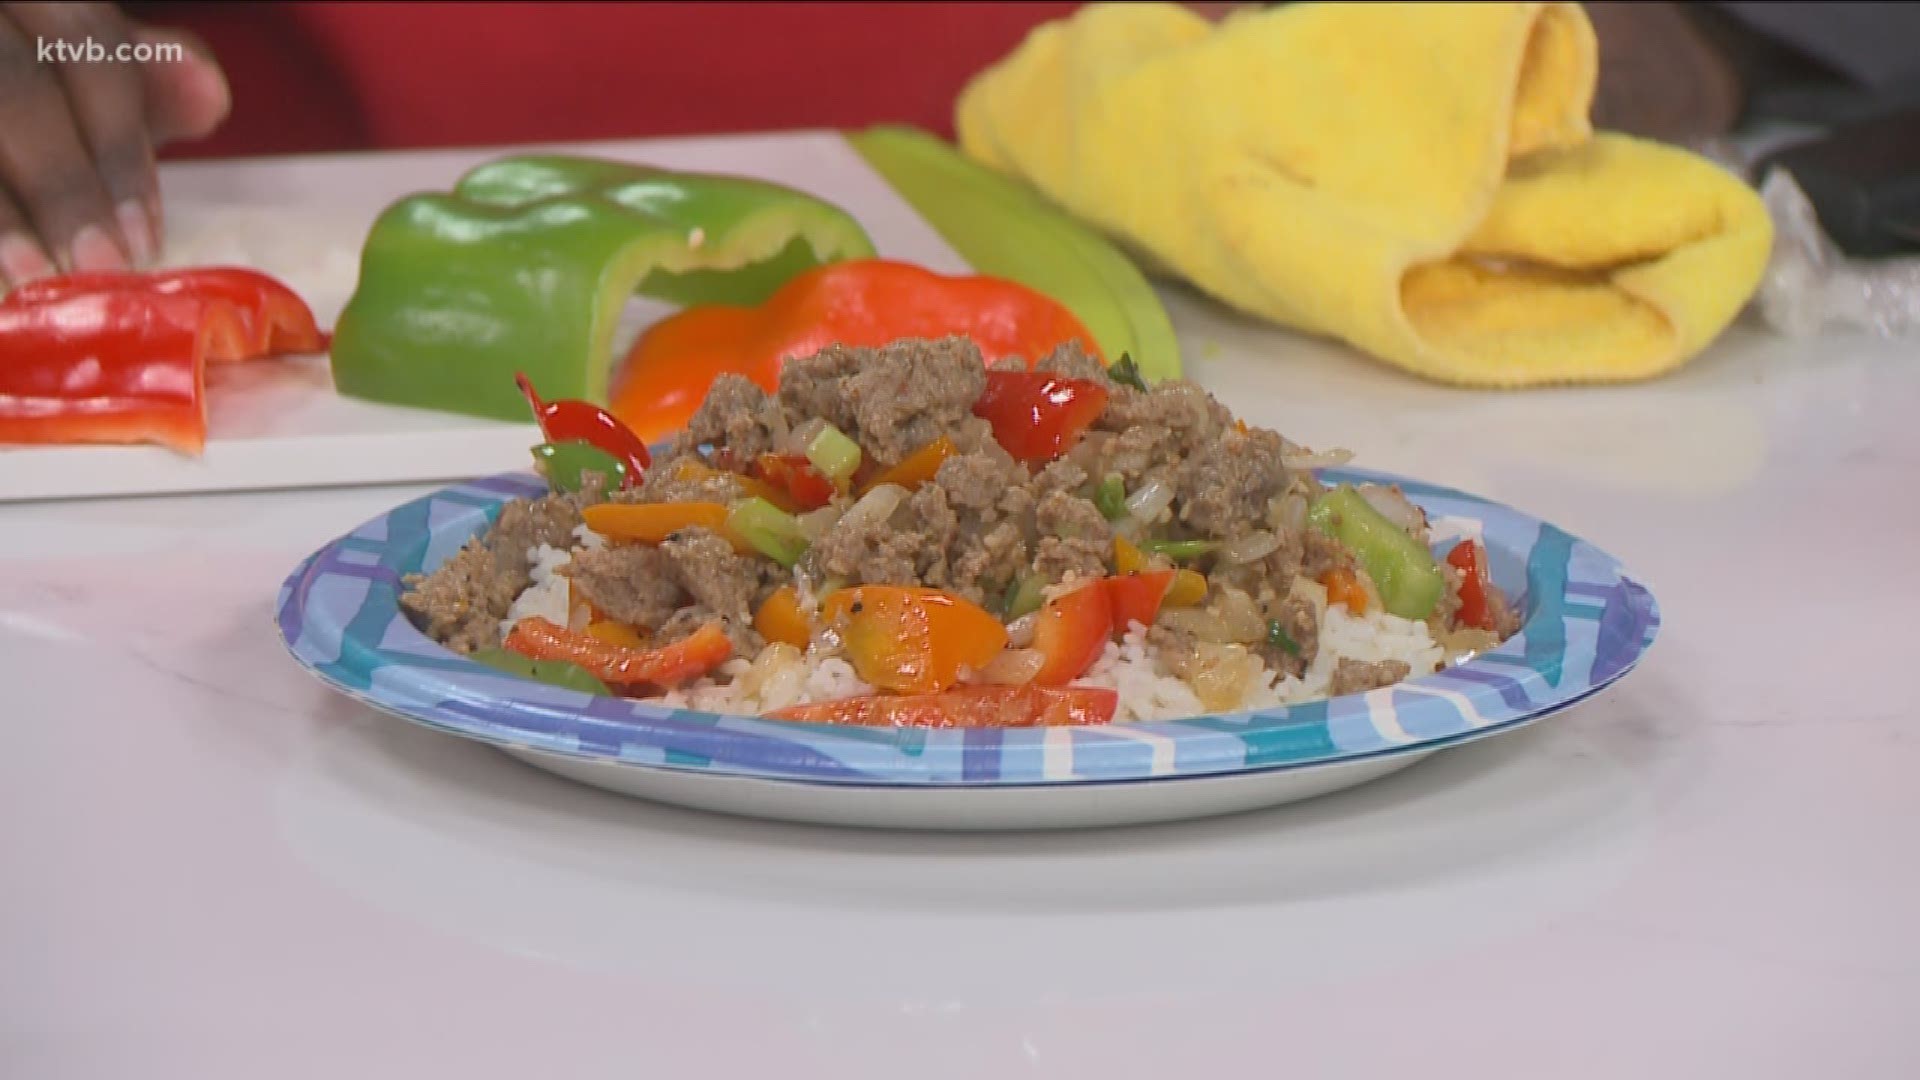 Chef Yvonne Anderson shows how to make a hearty dish for the fall season.